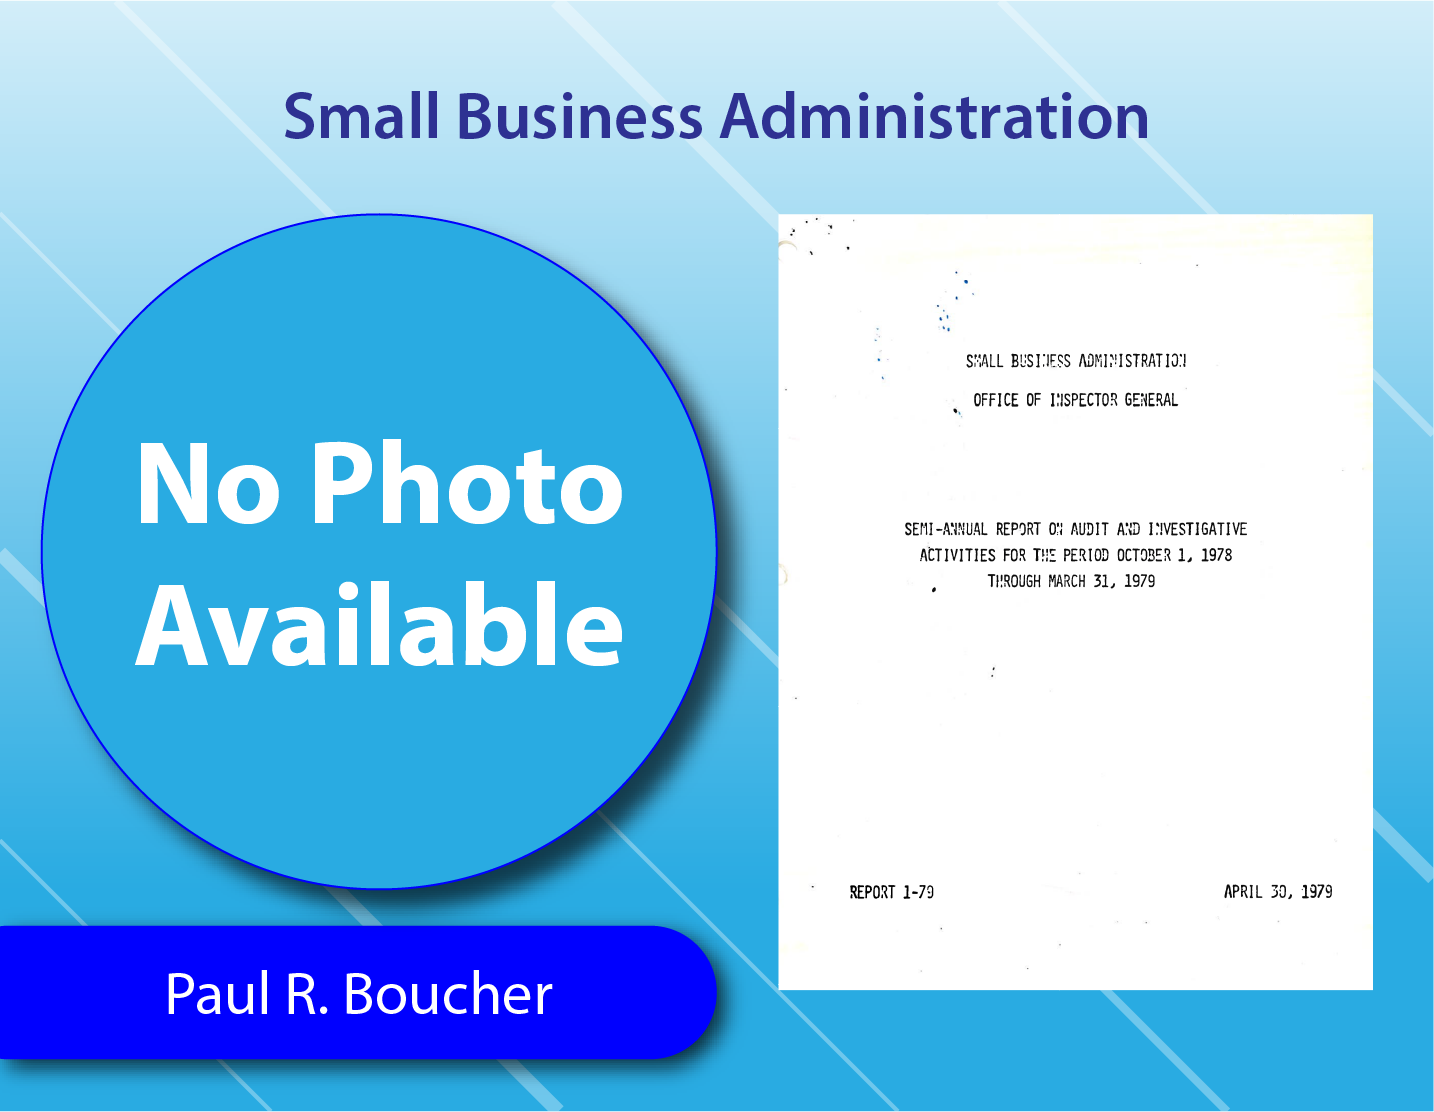 Small Business Administration - Paul R. Boucher